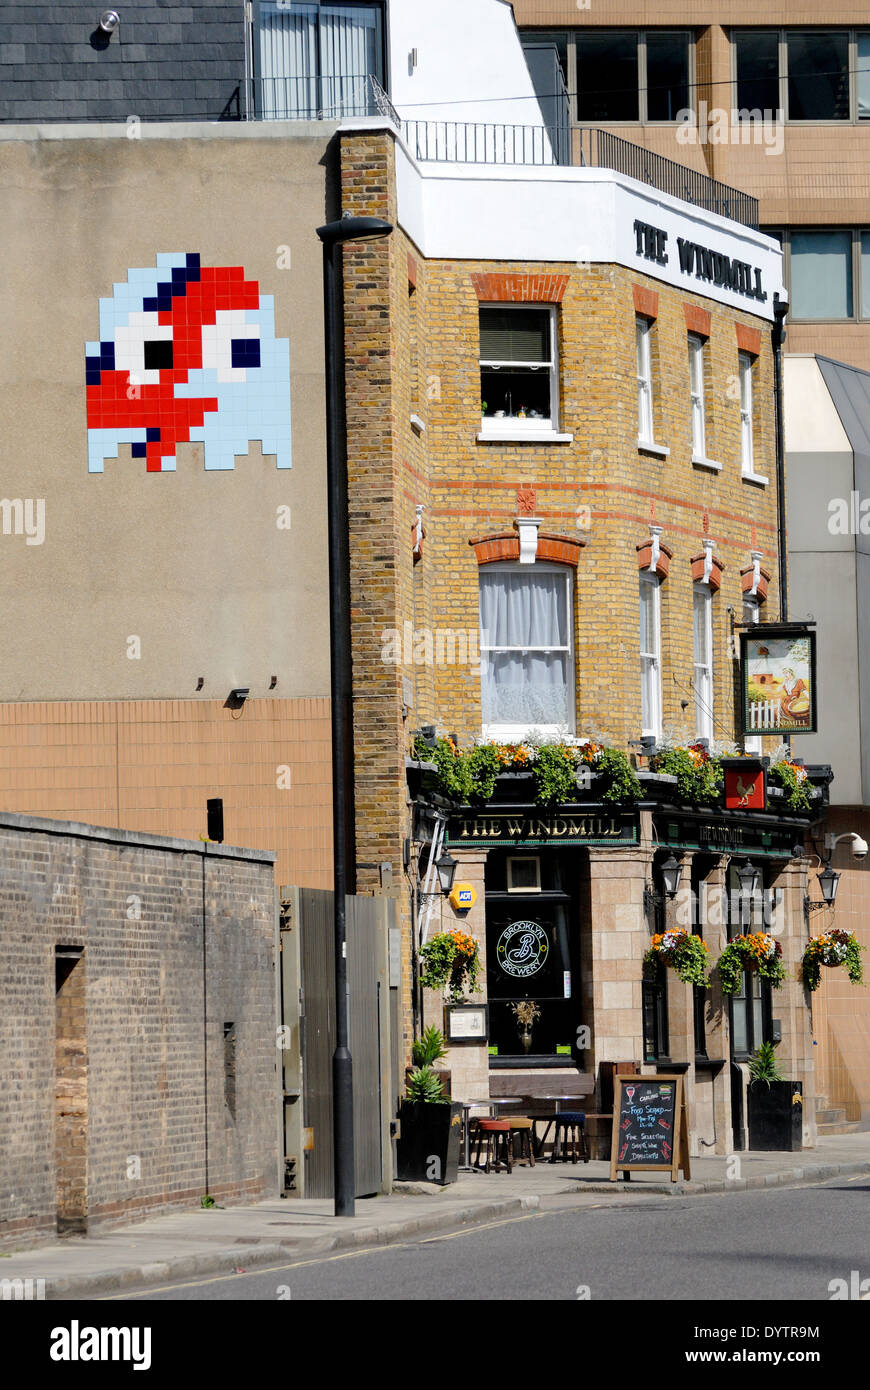 London, England, UK. Space invader tiled street art by 'Invader' (French urban artist) in Lambeth, Windmill pub Stock Photo